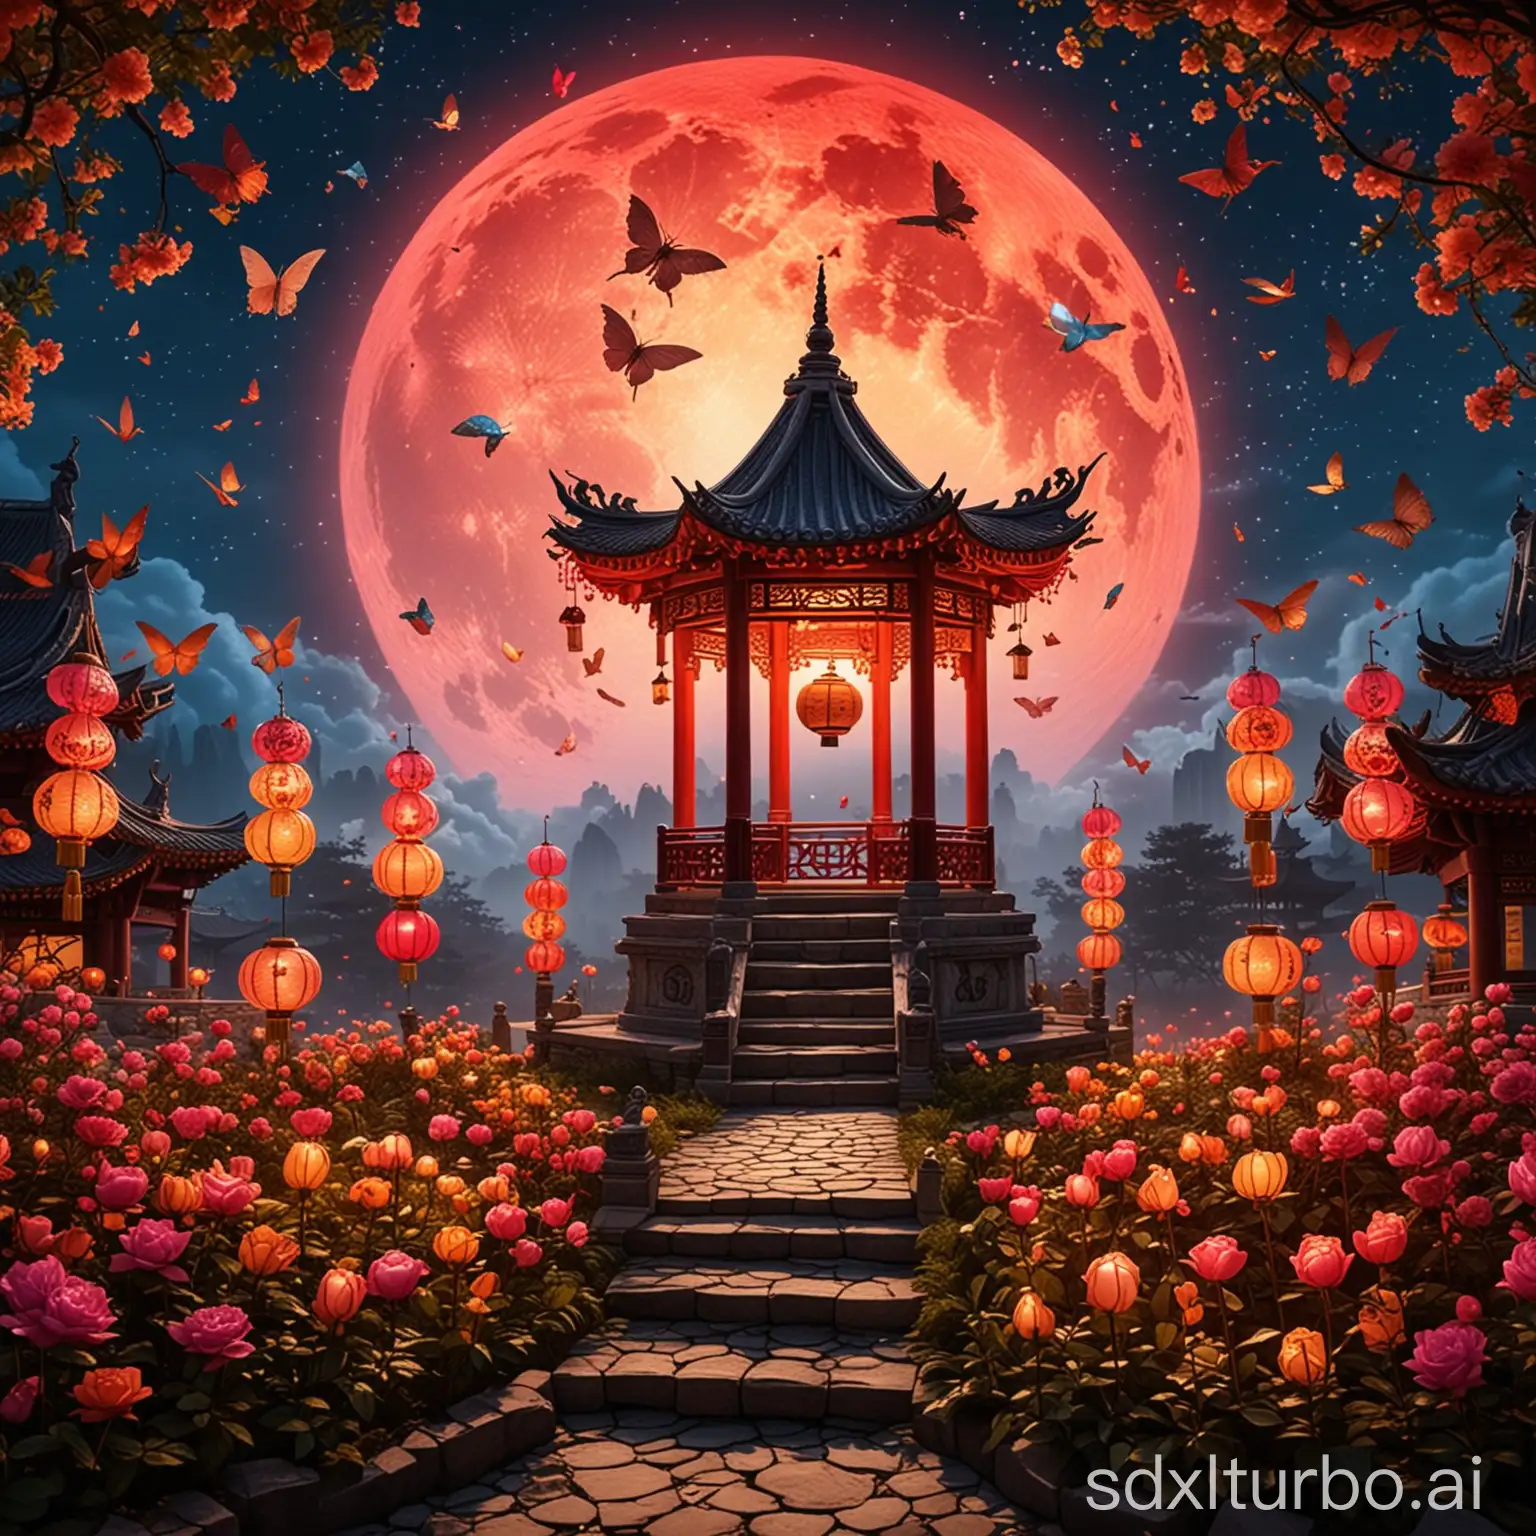 The image of a large rose with petals blooming, colorful lantern butterflies and birds, Chinese-style pavilion lanterns, rockery lanterns, the lantern of the Chinese mythological figure Chang'e, rabbit lanterns, with a large moon background with colorful clouds above the back, combined into a beautiful scenery, in the style of Li Keran, evening background, lighting effects, LED, Shanghai New Year, wide-angle lens.